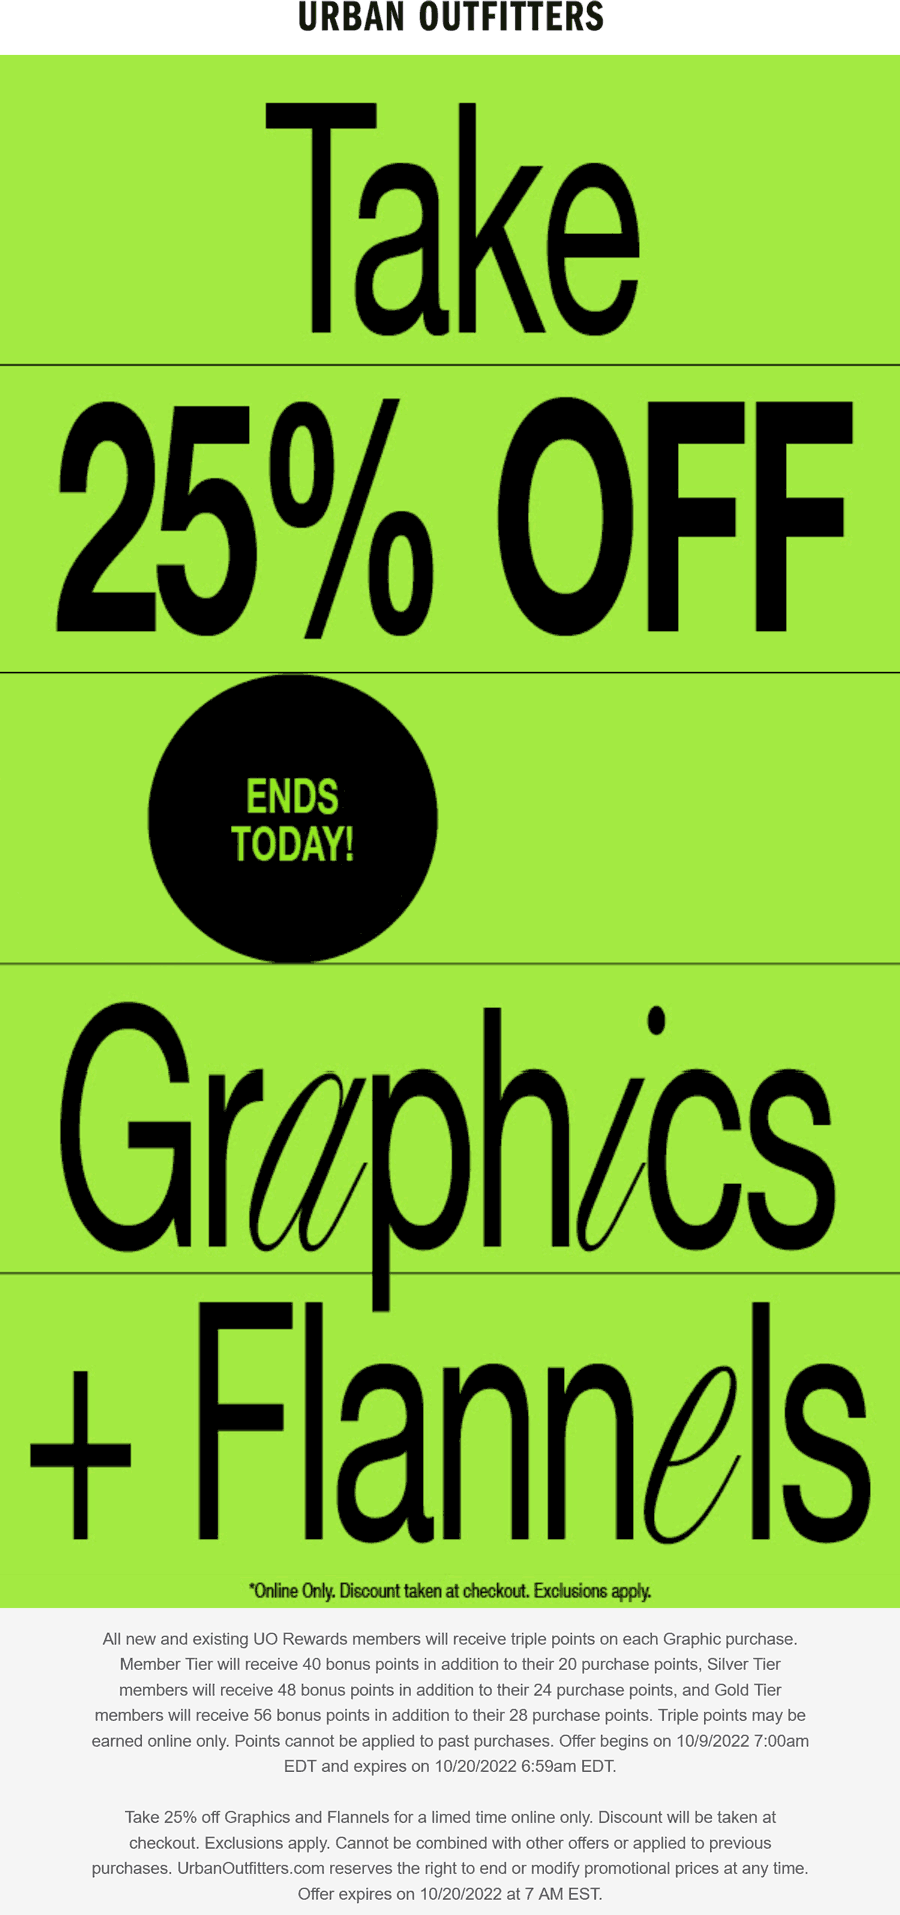 Urban Outfitters stores Coupon  25% off graphics & flannels today at Urban Outfitters #urbanoutfitters 